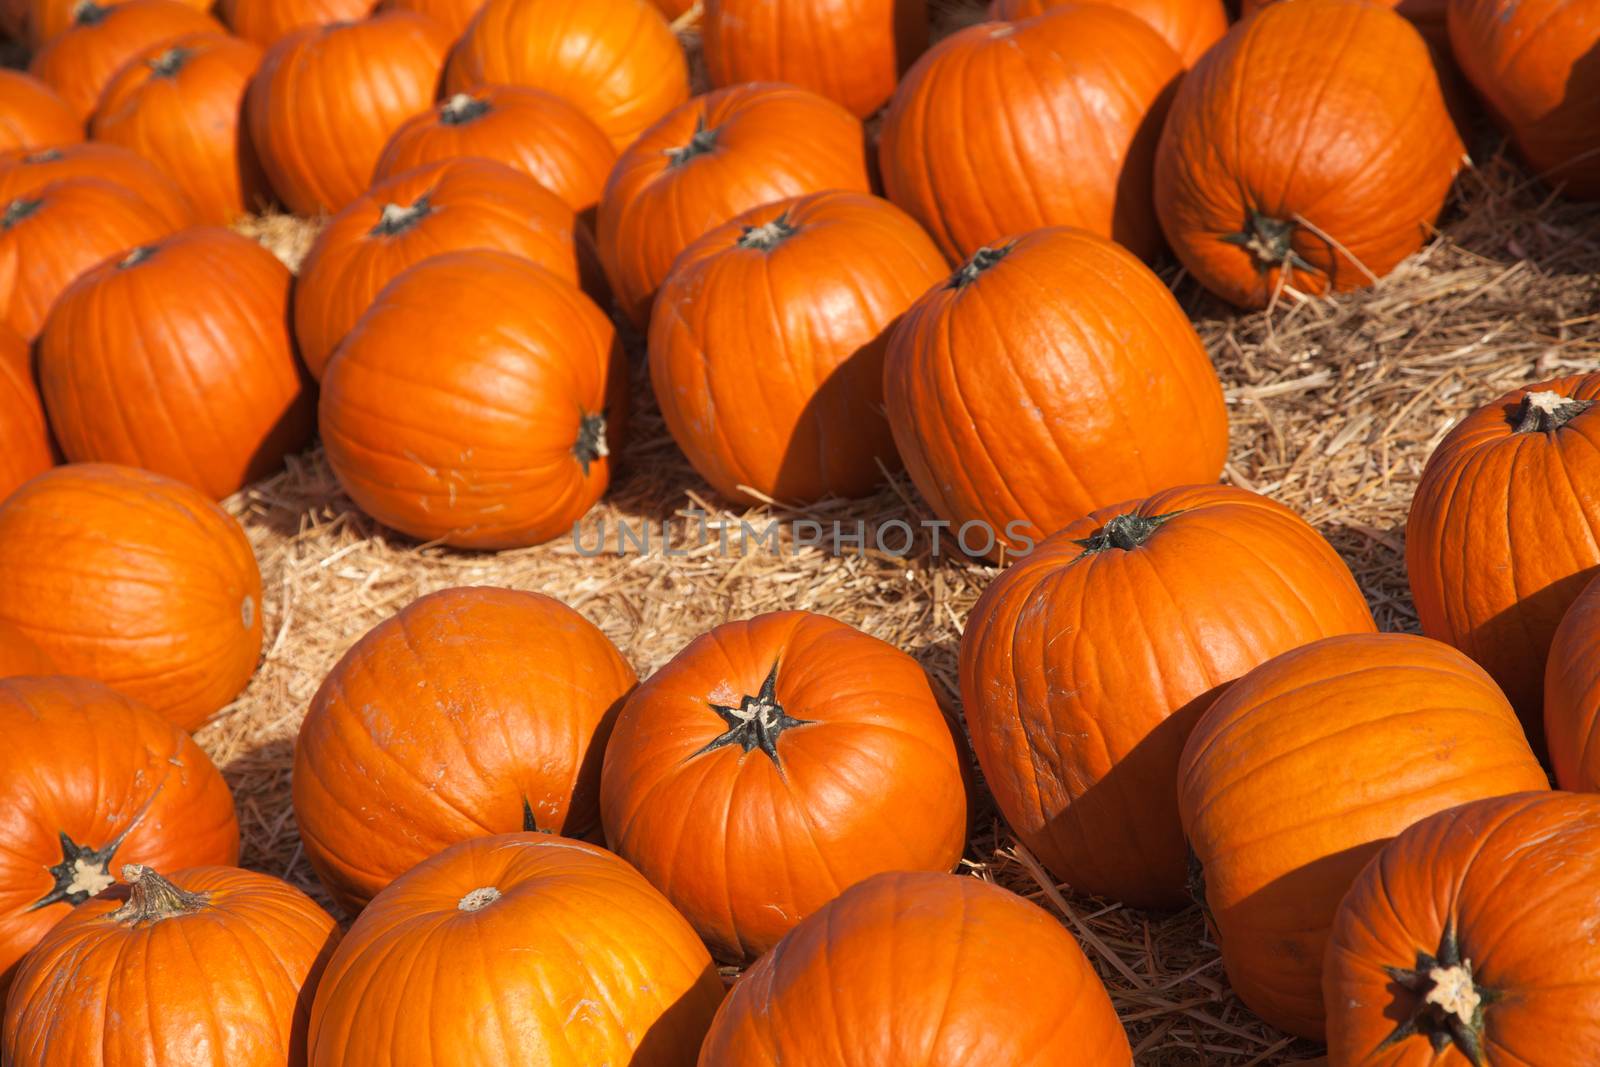 Fresh Orange Pumpkins and Hay in a Rustic Outdoor Fall Setting.
